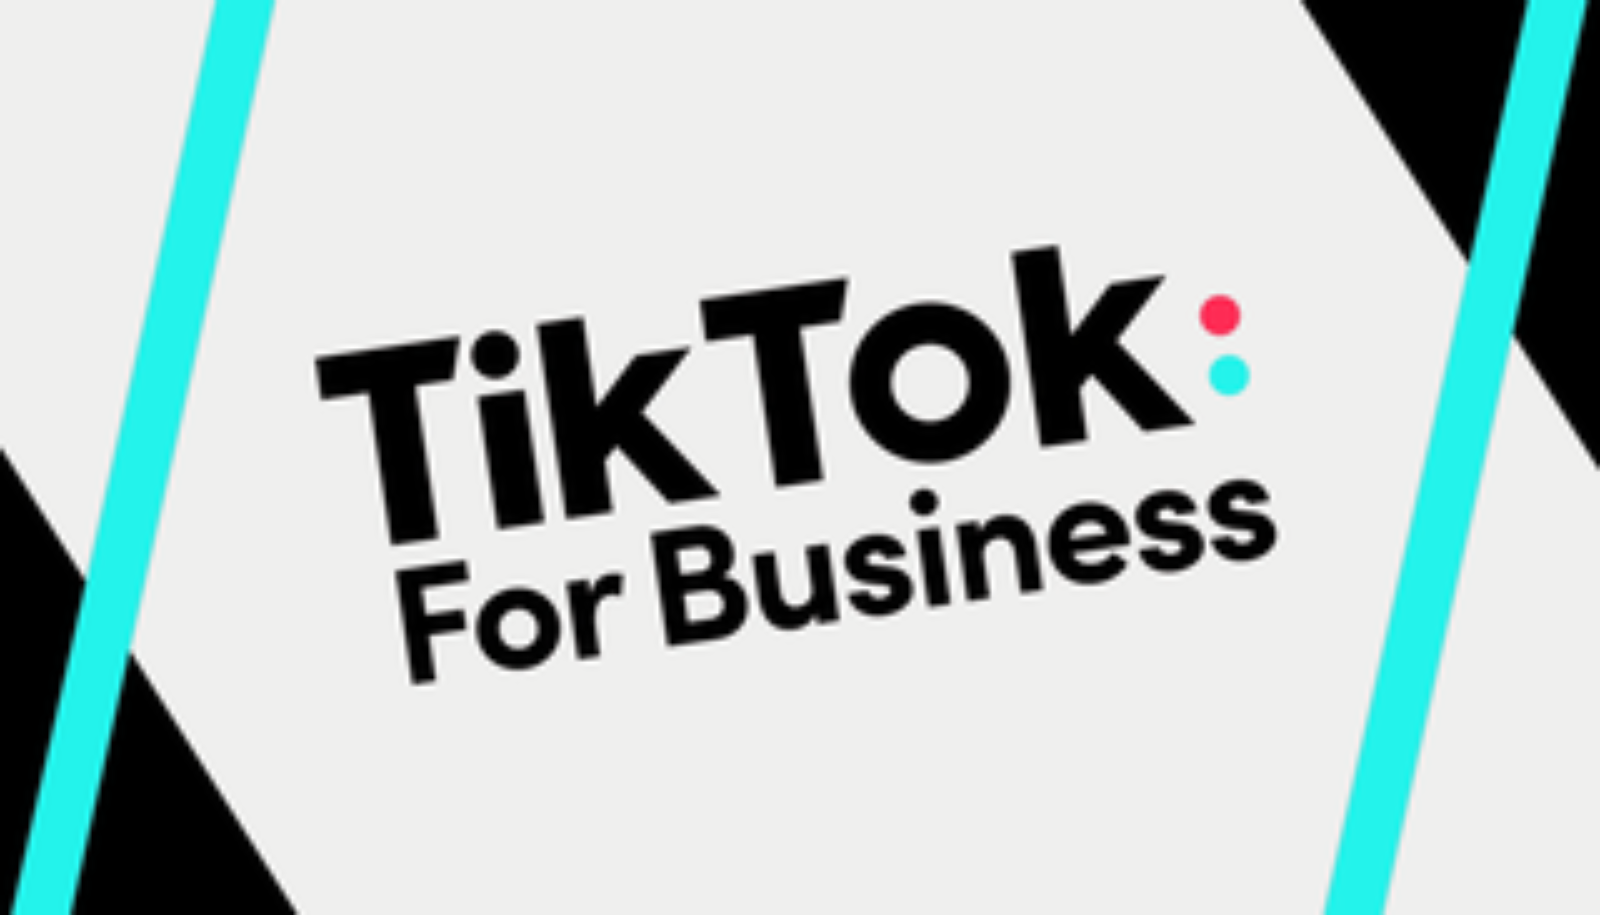 How to Use Tiktok for Business